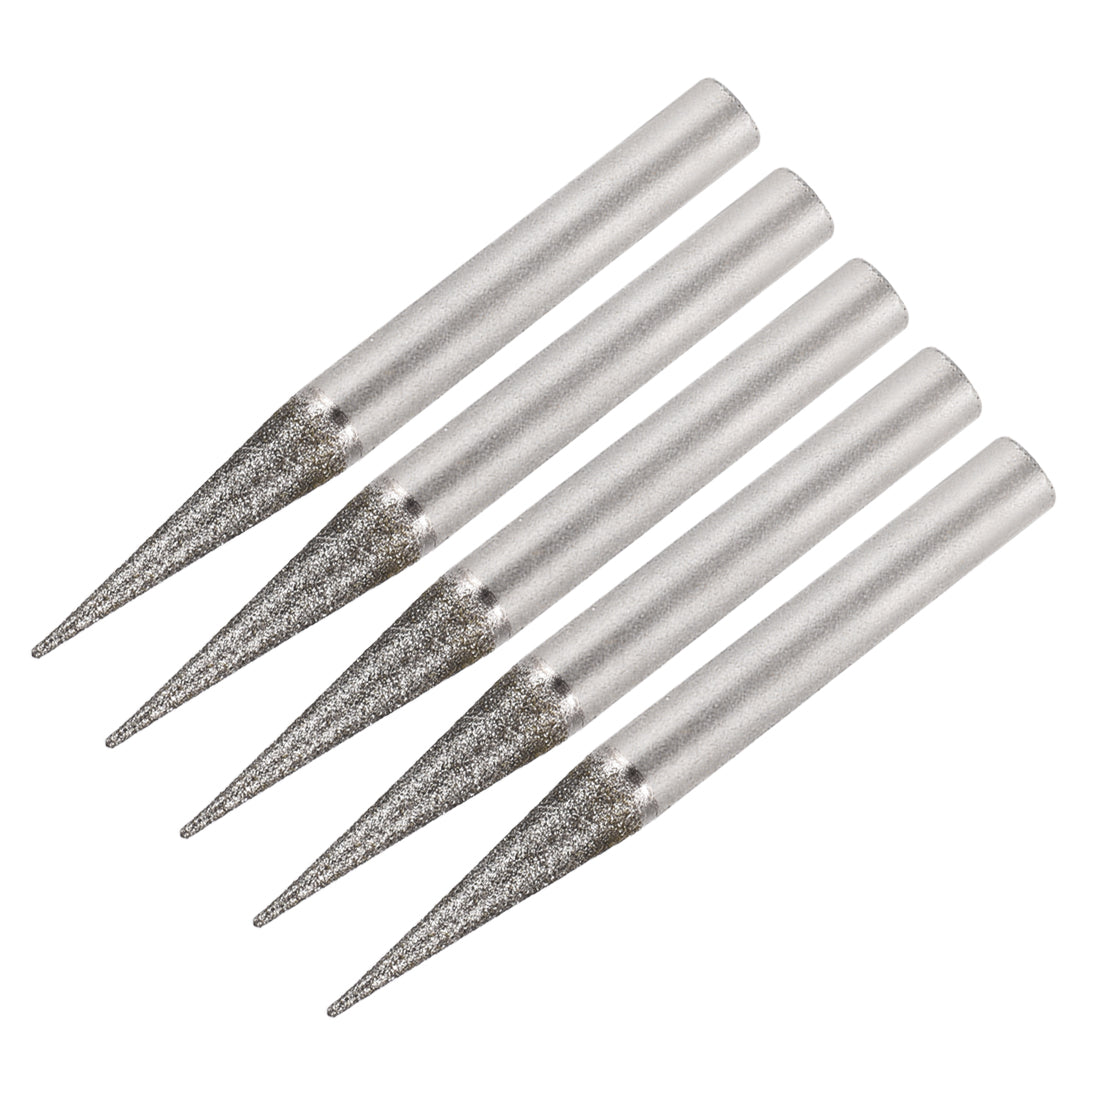 uxcell Uxcell Diamond Burrs Grinding Drill Bits for Carving Rotary Tool 1/4-Inch Shank 6mm Pointed 120 Grit 5 Pcs